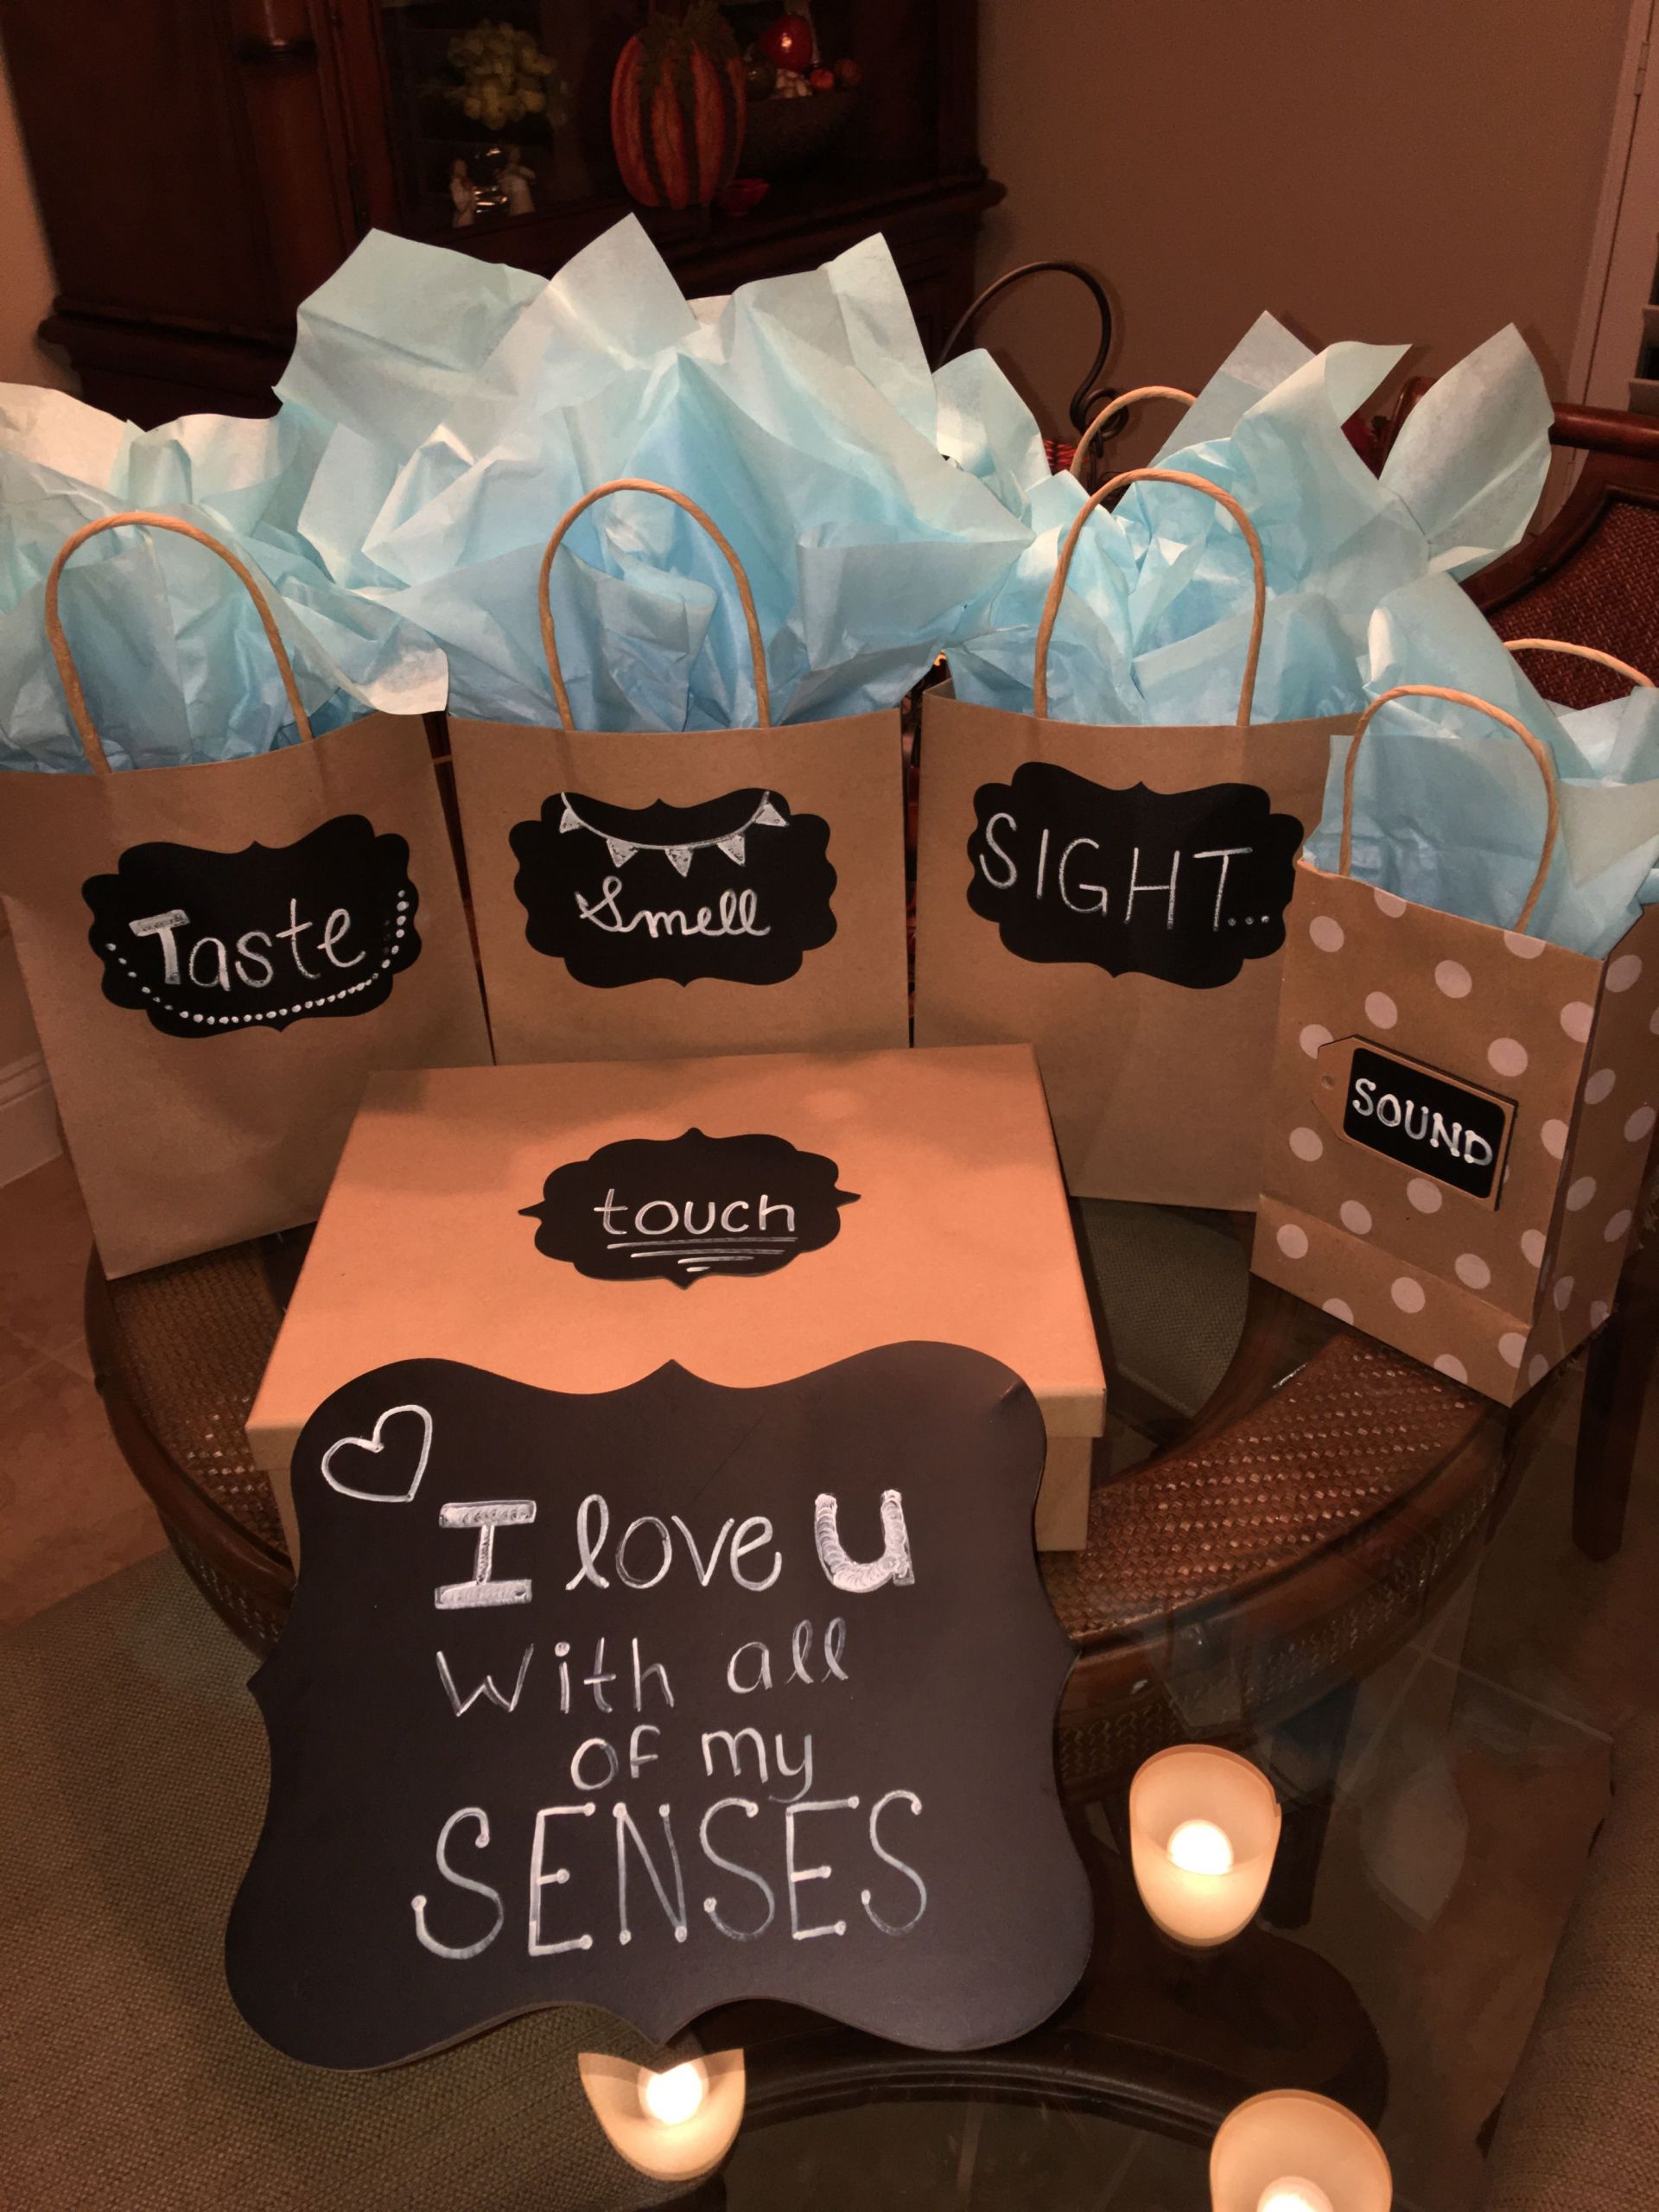 Best Boyfriend Gift Ideas
 I love you with all of my senses my version for my